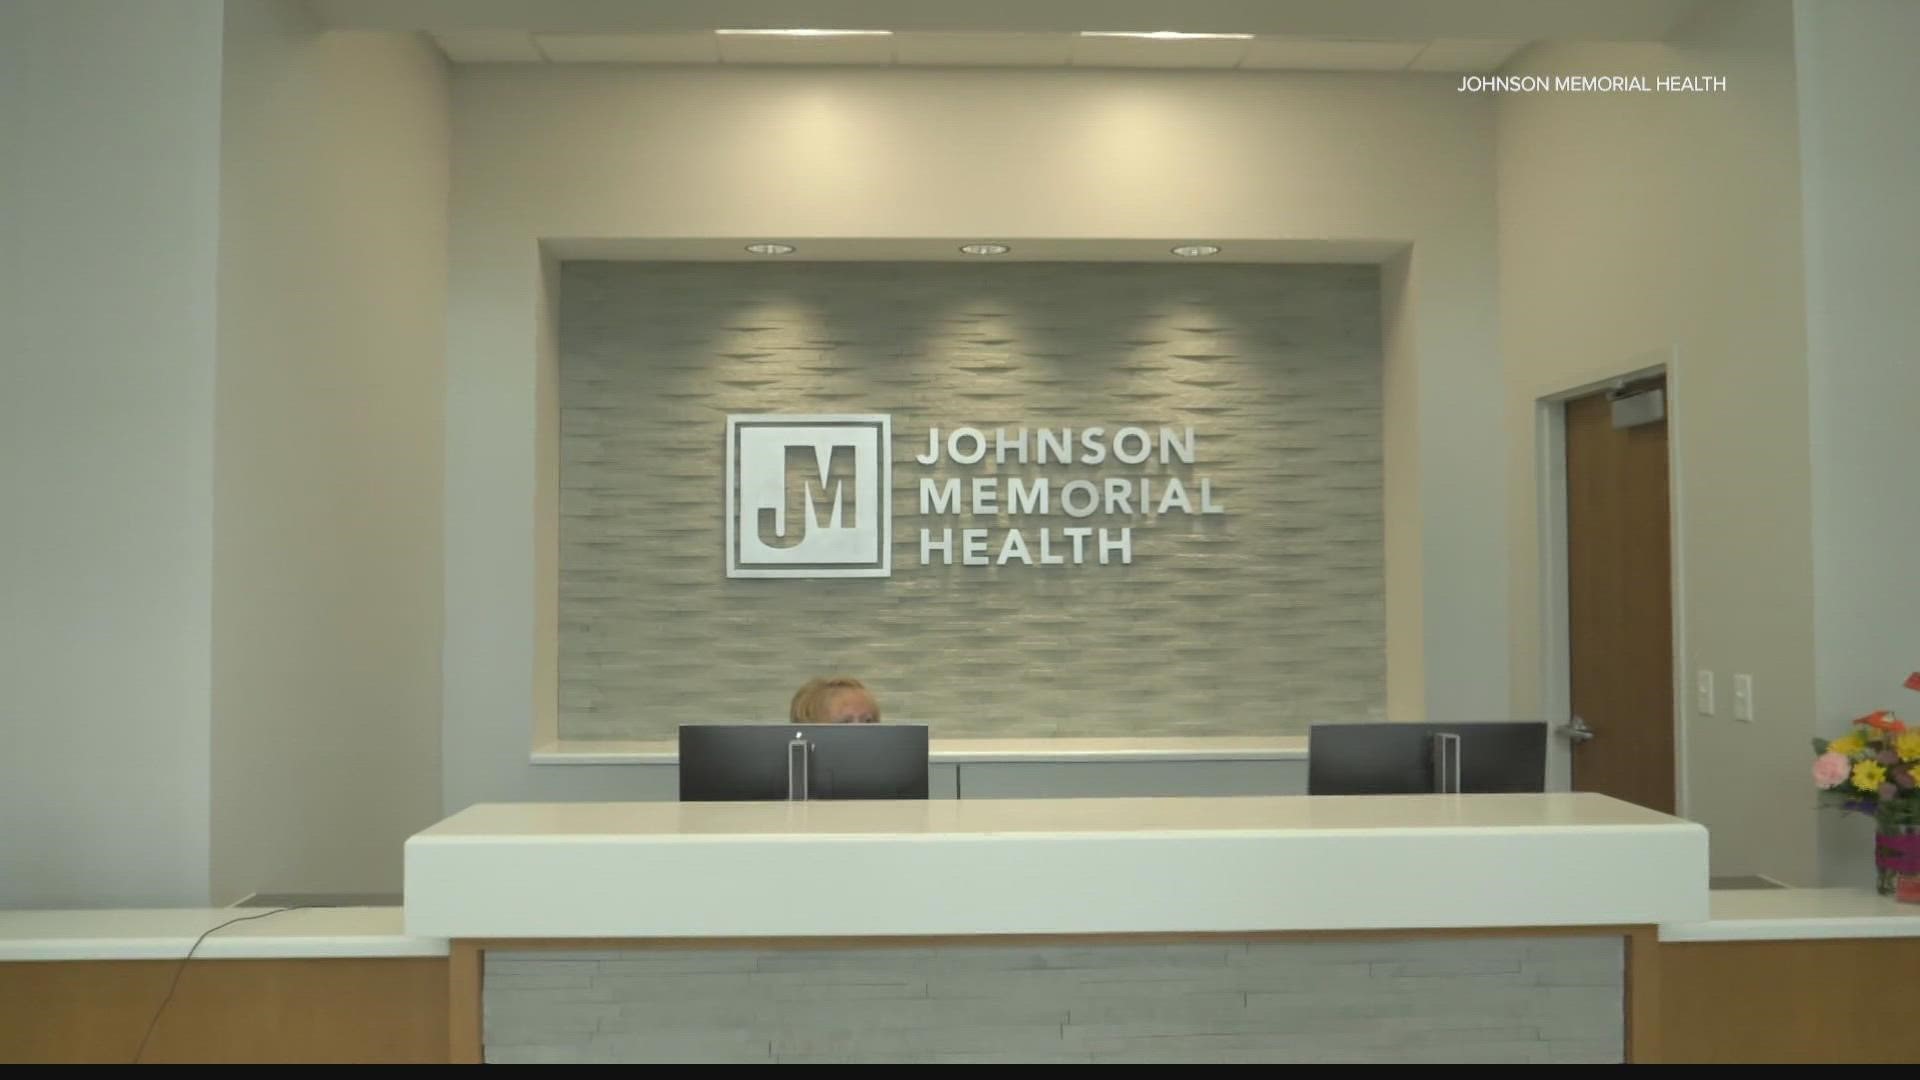 Johnson Memorial Health is working with the FBI to investigate a cyberattack that resulted in the hospital's computer network being disabled.